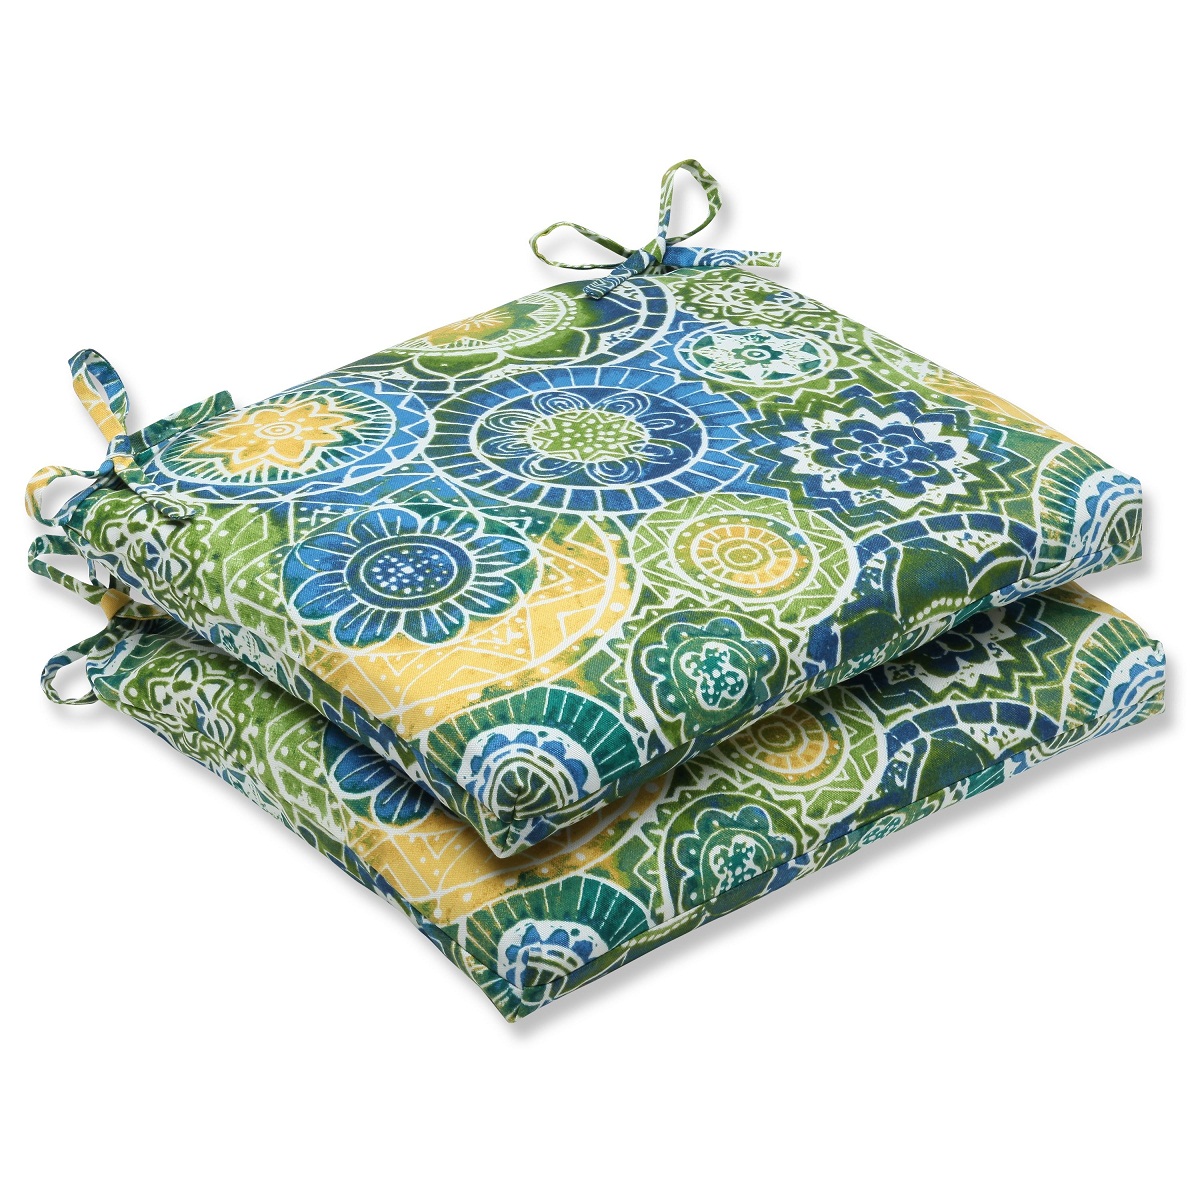 CC Outdoor Living Set of 2 Laguna Mosaico Blue, Green and Yellow Outdoor Patio Chair Cushions 18.5"